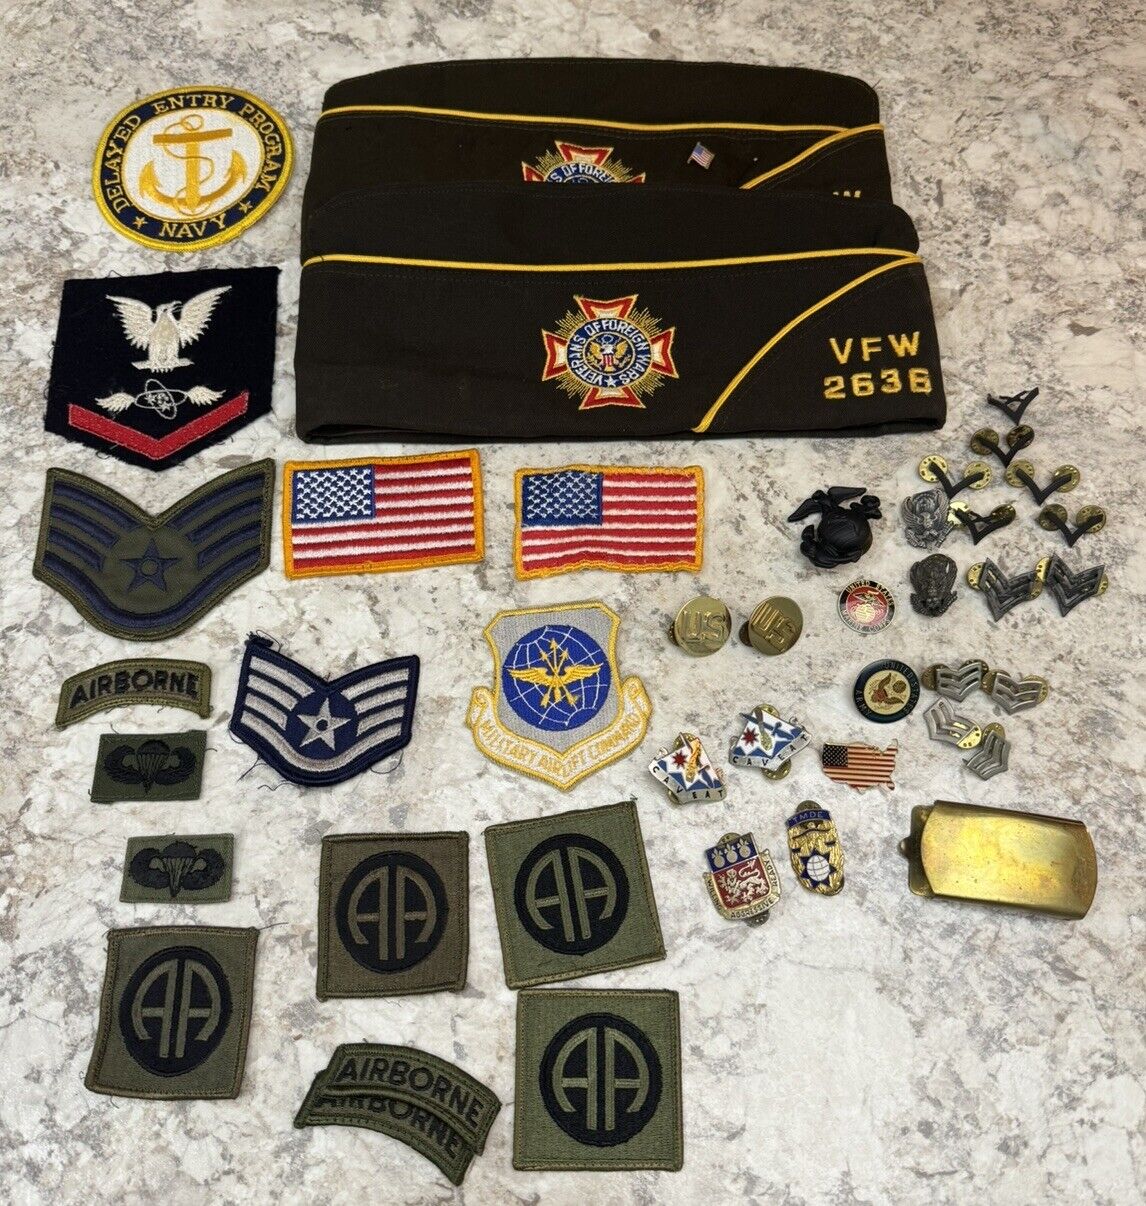 Lot of Vintage Military Pins, Patches, Medals, Etc. - 43 Pieces Total